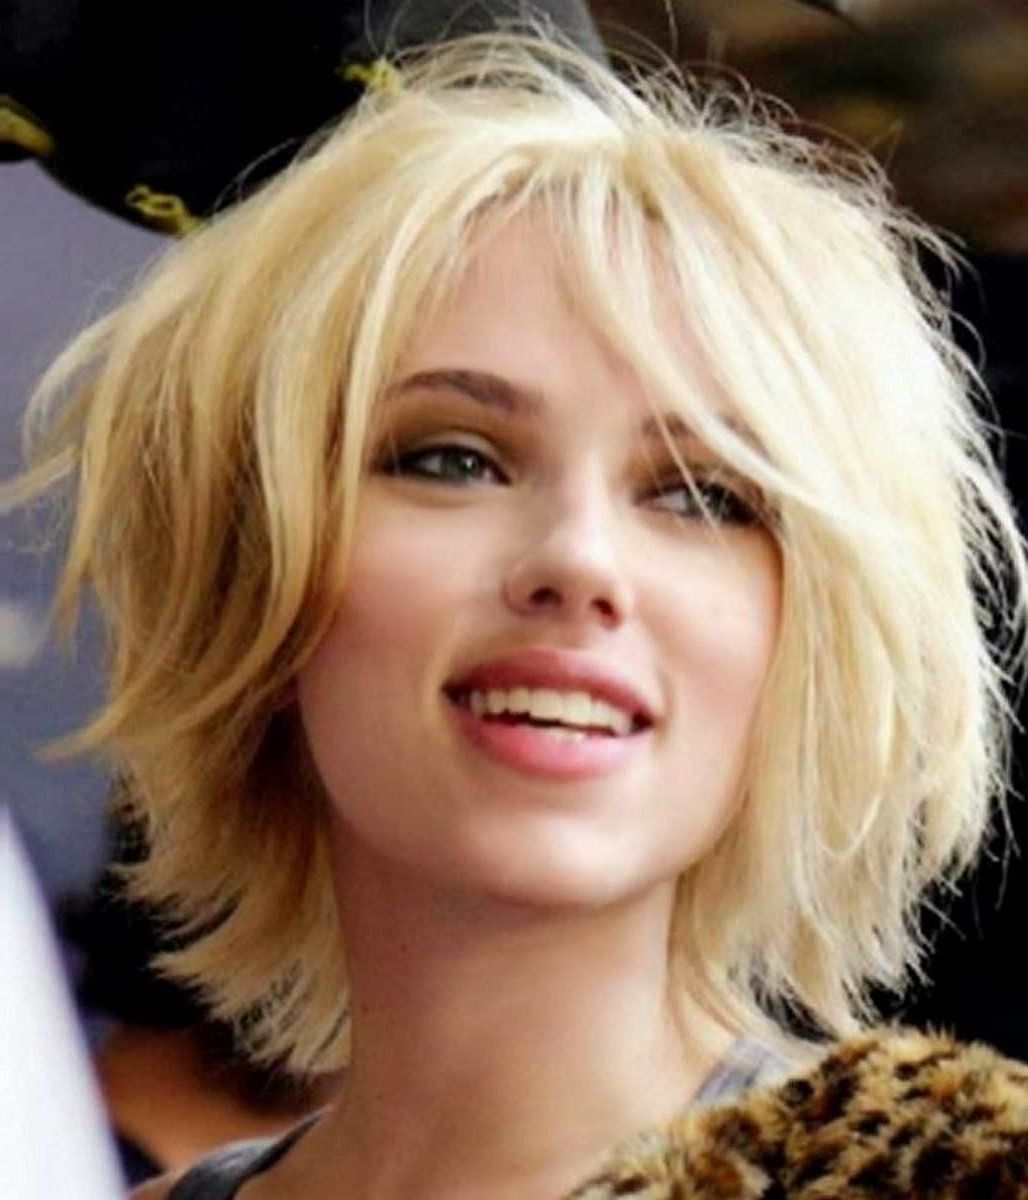 Short Shaggy Hairstyles For Thick Hair: Popular Short Shaggy Intended For Popular Shaggy Bob Hairstyles For Thick Hair (View 4 of 15)